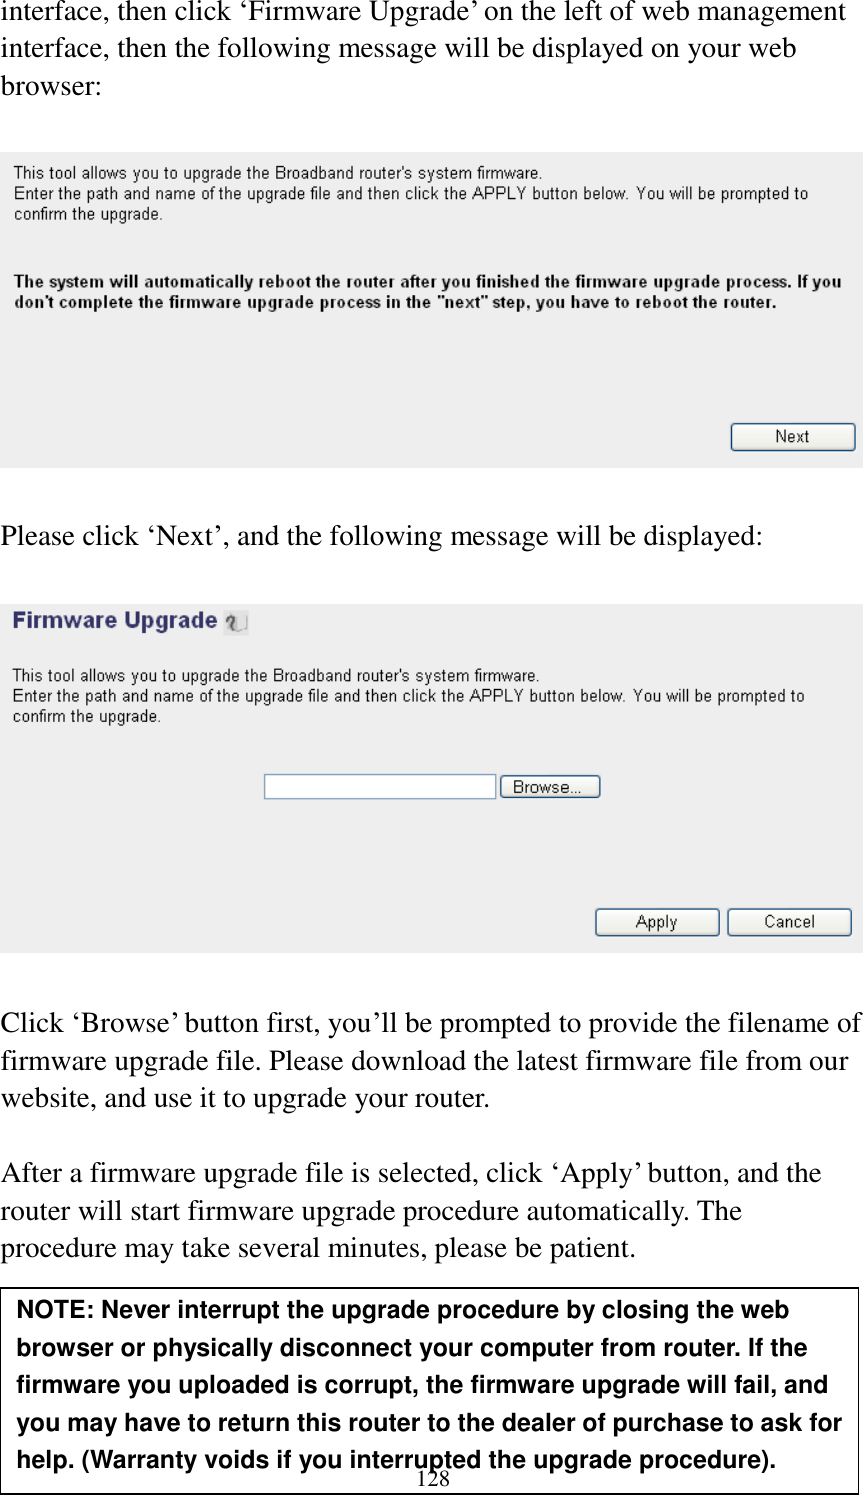 128 interface, then click „Firmware Upgrade‟ on the left of web management interface, then the following message will be displayed on your web browser:    Please click „Next‟, and the following message will be displayed:    Click „Browse‟ button first, you‟ll be prompted to provide the filename of firmware upgrade file. Please download the latest firmware file from our website, and use it to upgrade your router.    After a firmware upgrade file is selected, click „Apply‟ button, and the router will start firmware upgrade procedure automatically. The procedure may take several minutes, please be patient.     NOTE: Never interrupt the upgrade procedure by closing the web browser or physically disconnect your computer from router. If the firmware you uploaded is corrupt, the firmware upgrade will fail, and you may have to return this router to the dealer of purchase to ask for help. (Warranty voids if you interrupted the upgrade procedure).   